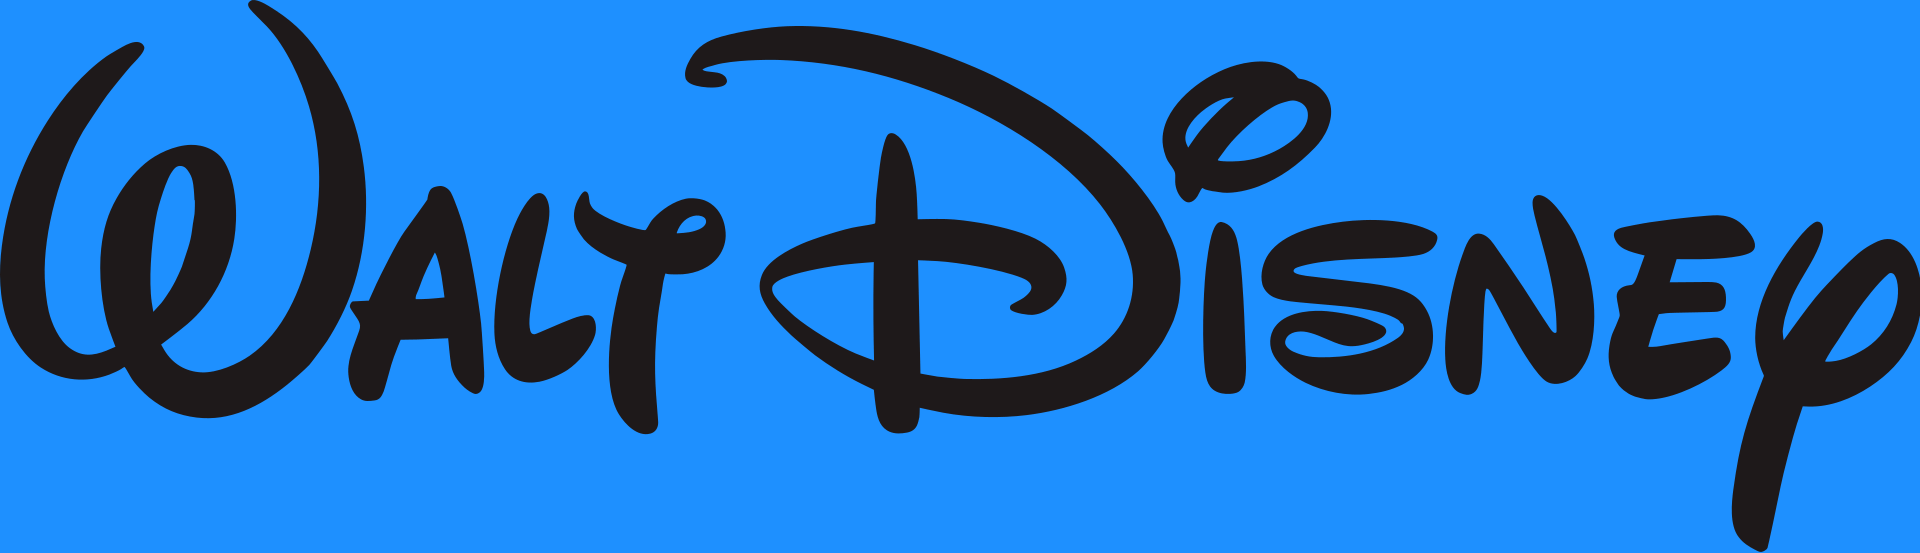 In this example, we experiment with rebranding the well-known Disney company logo. As it originally had only a black-and-white format, we added vibrant colors to it by using a colored background. We fill the background with a beautiful dodger blue color and view the bright logo result in the output. (Source: Wikipedia.)